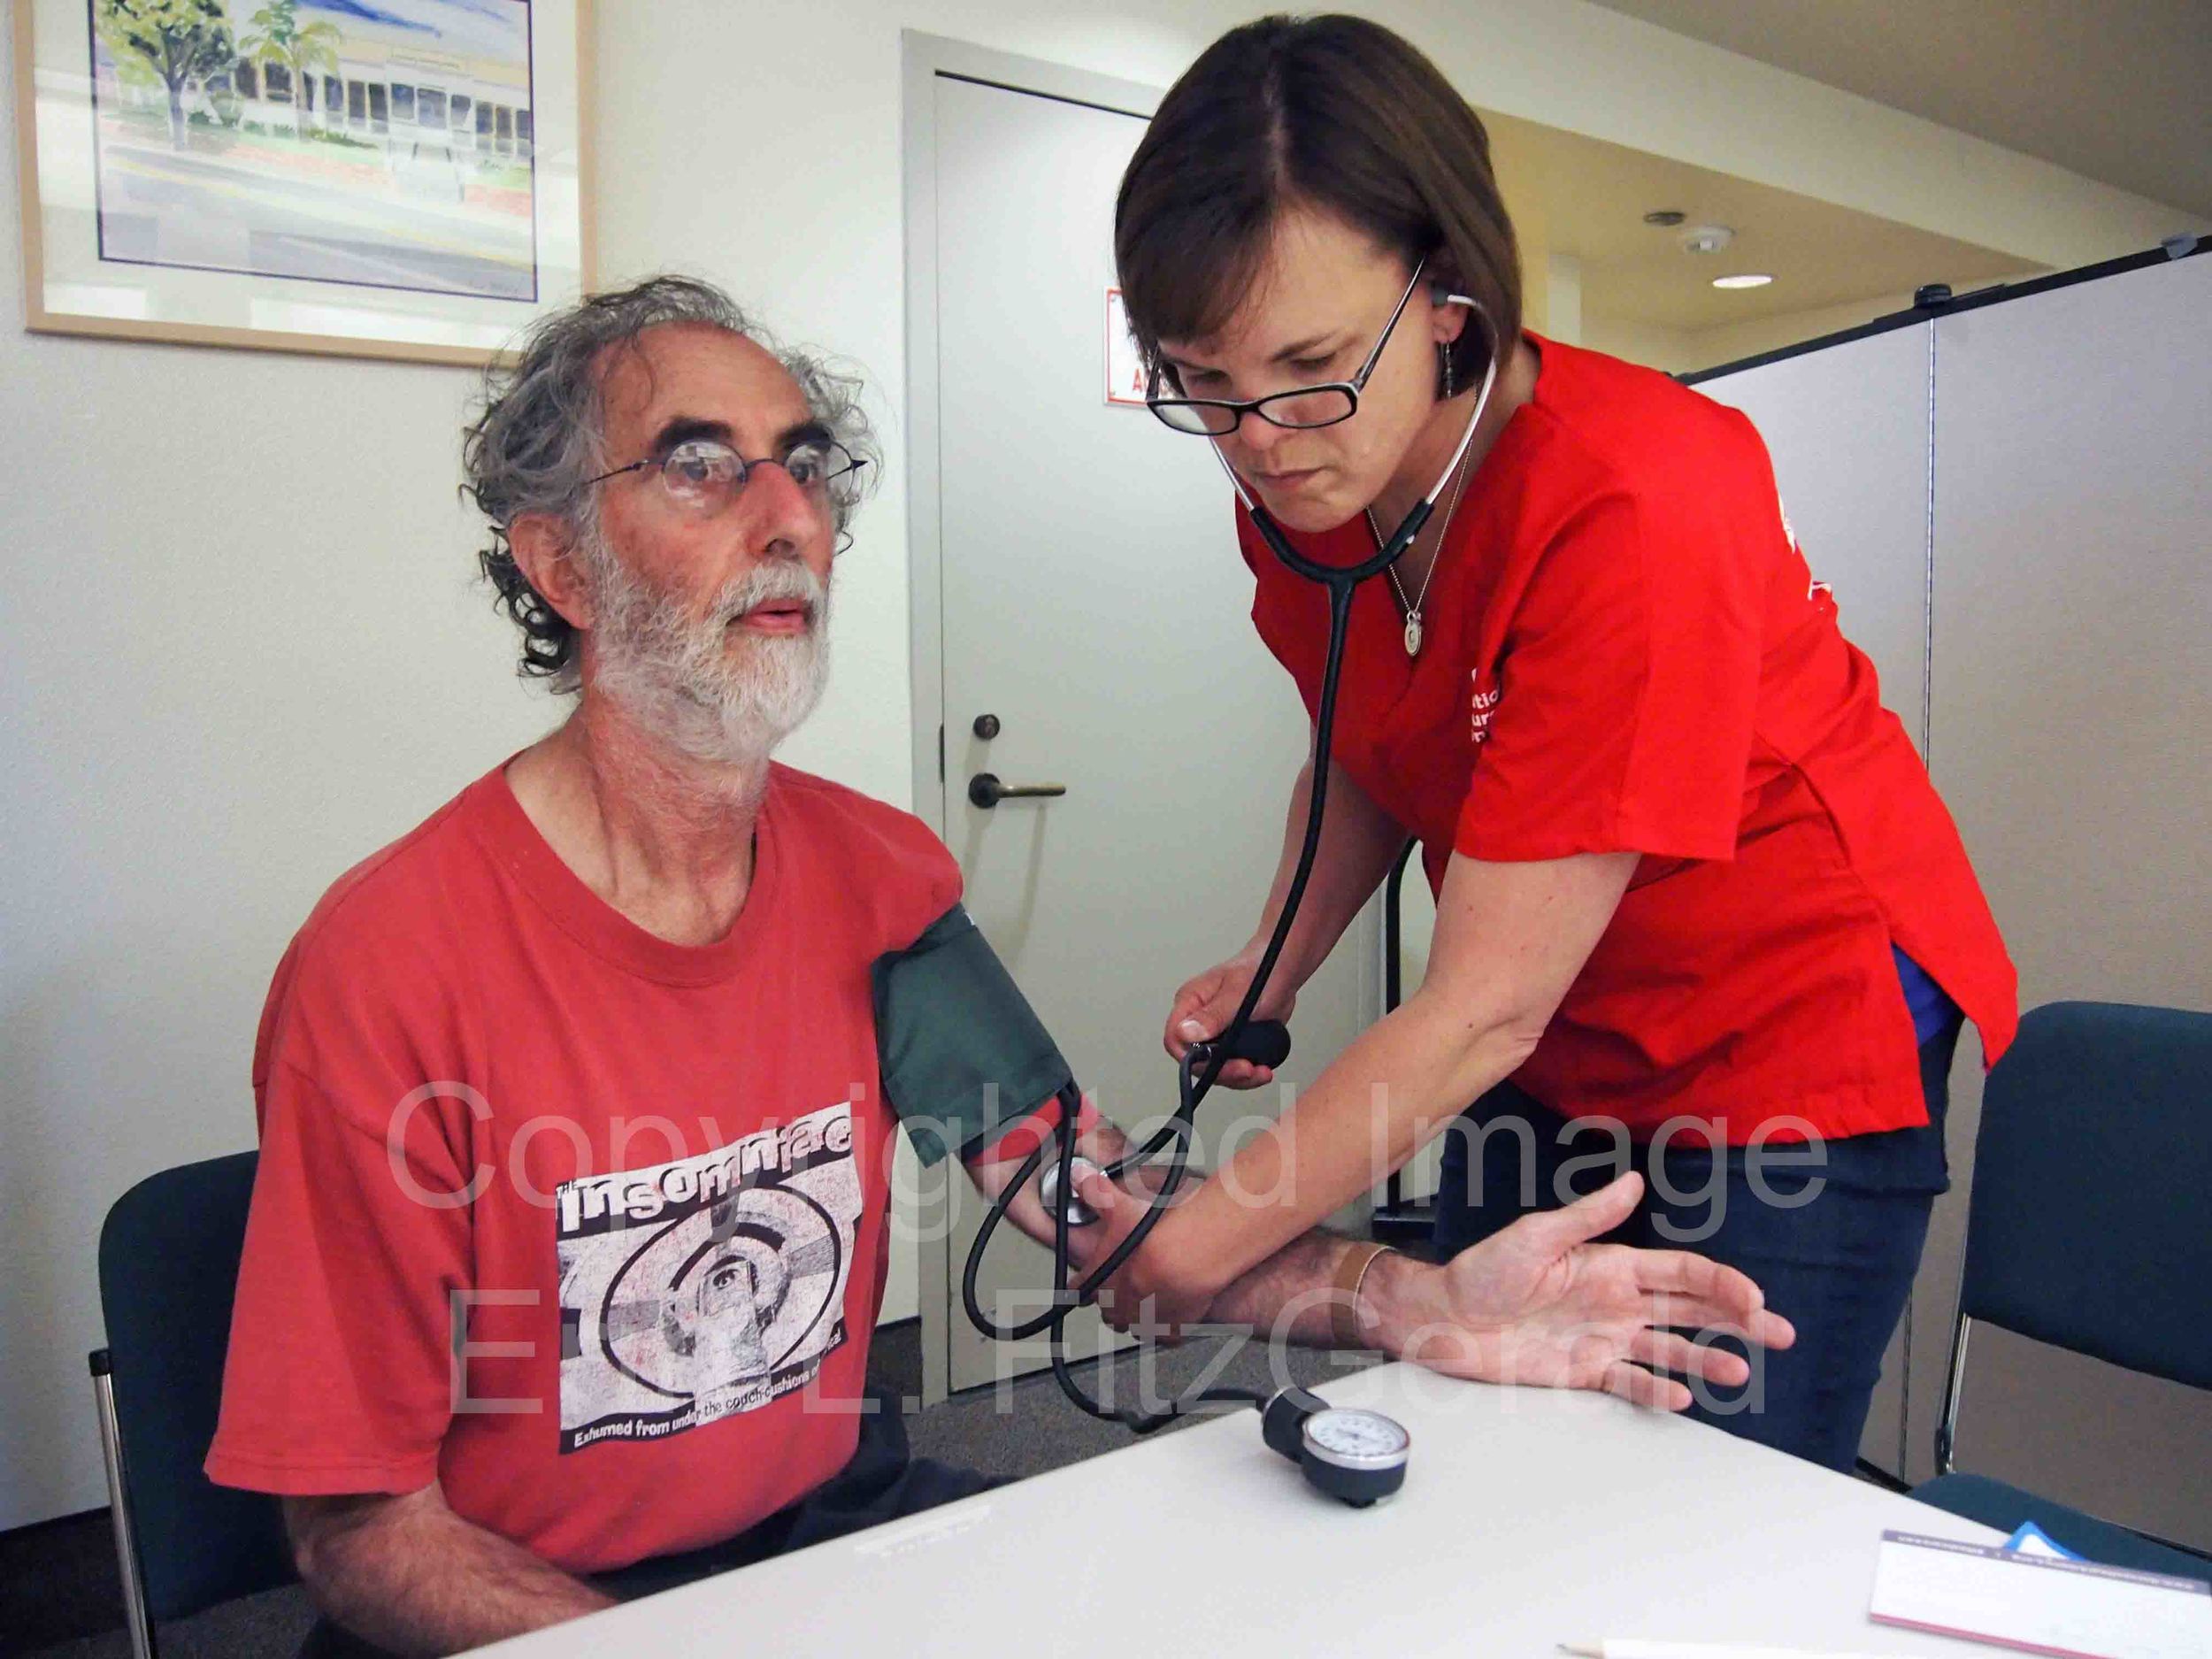   A volunteer nurse in San Luis Obispo takes a man's blood pressure during CNA's Medicare-for-All bus tour. The bus tour was designed to promote wellness, and discussion about healthcare access.  